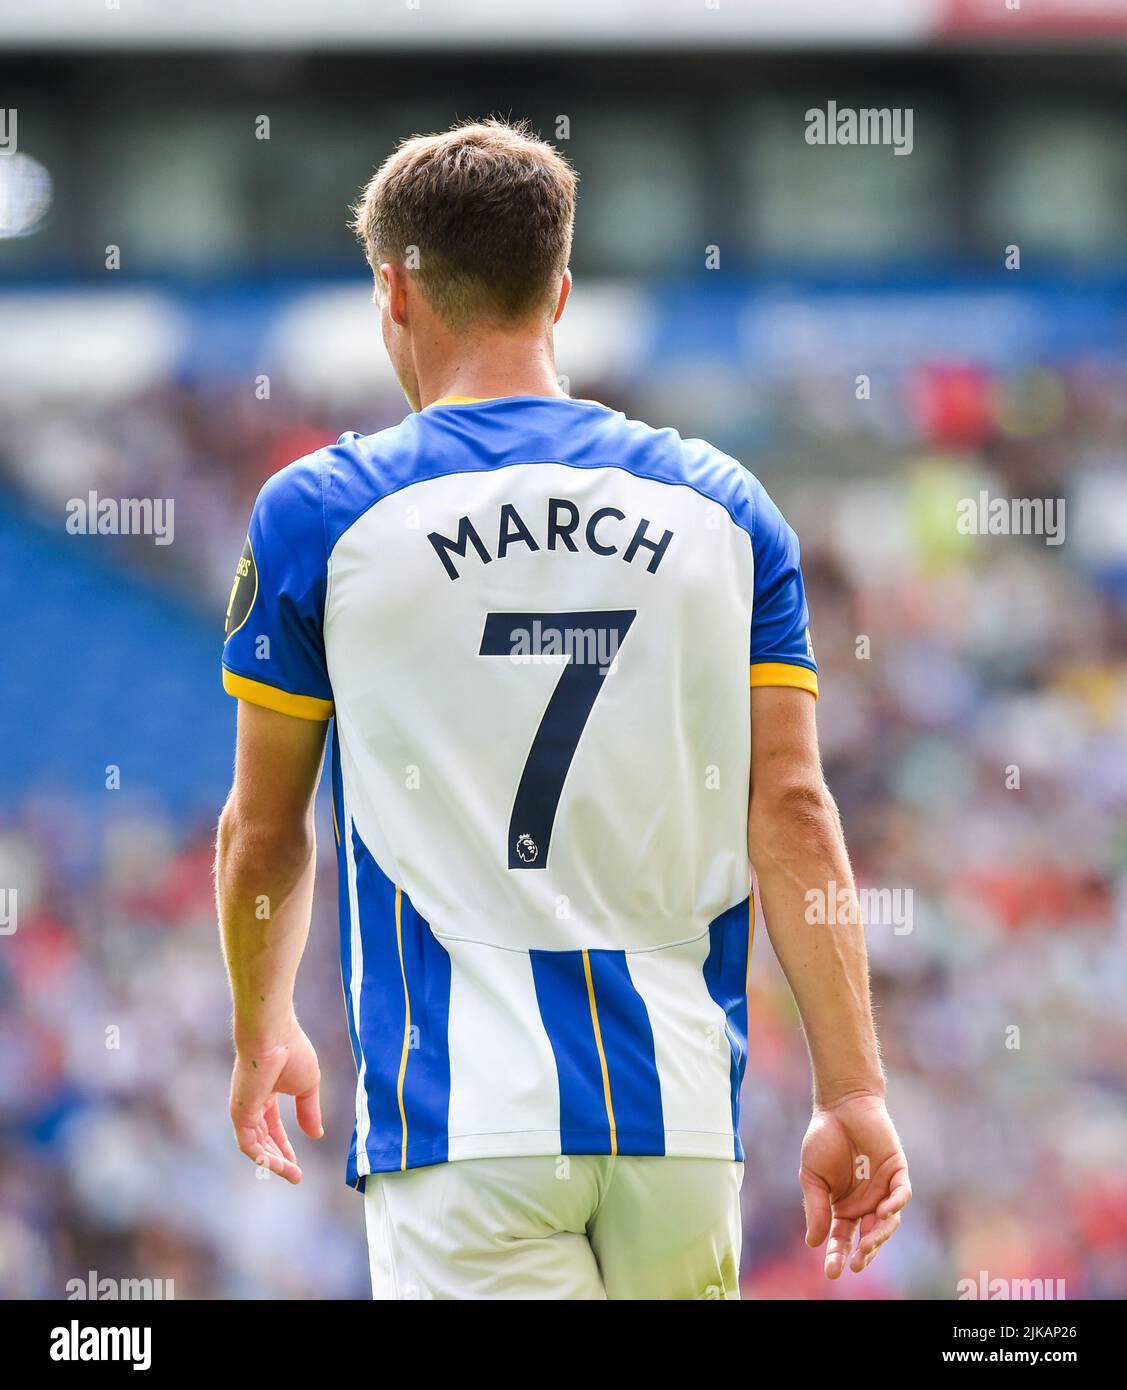 Solly March of Brighton during the Pre Season friendly match between Brighton and Hove Albion and Espanyol at  the American Express Community Stadium, Brighton, UK - 30th July 2022  Editorial use only. No merchandising. For Football images FA and Premier League restrictions apply inc. no internet/mobile usage without FAPL license - for details contact Football Dataco Stock Photo